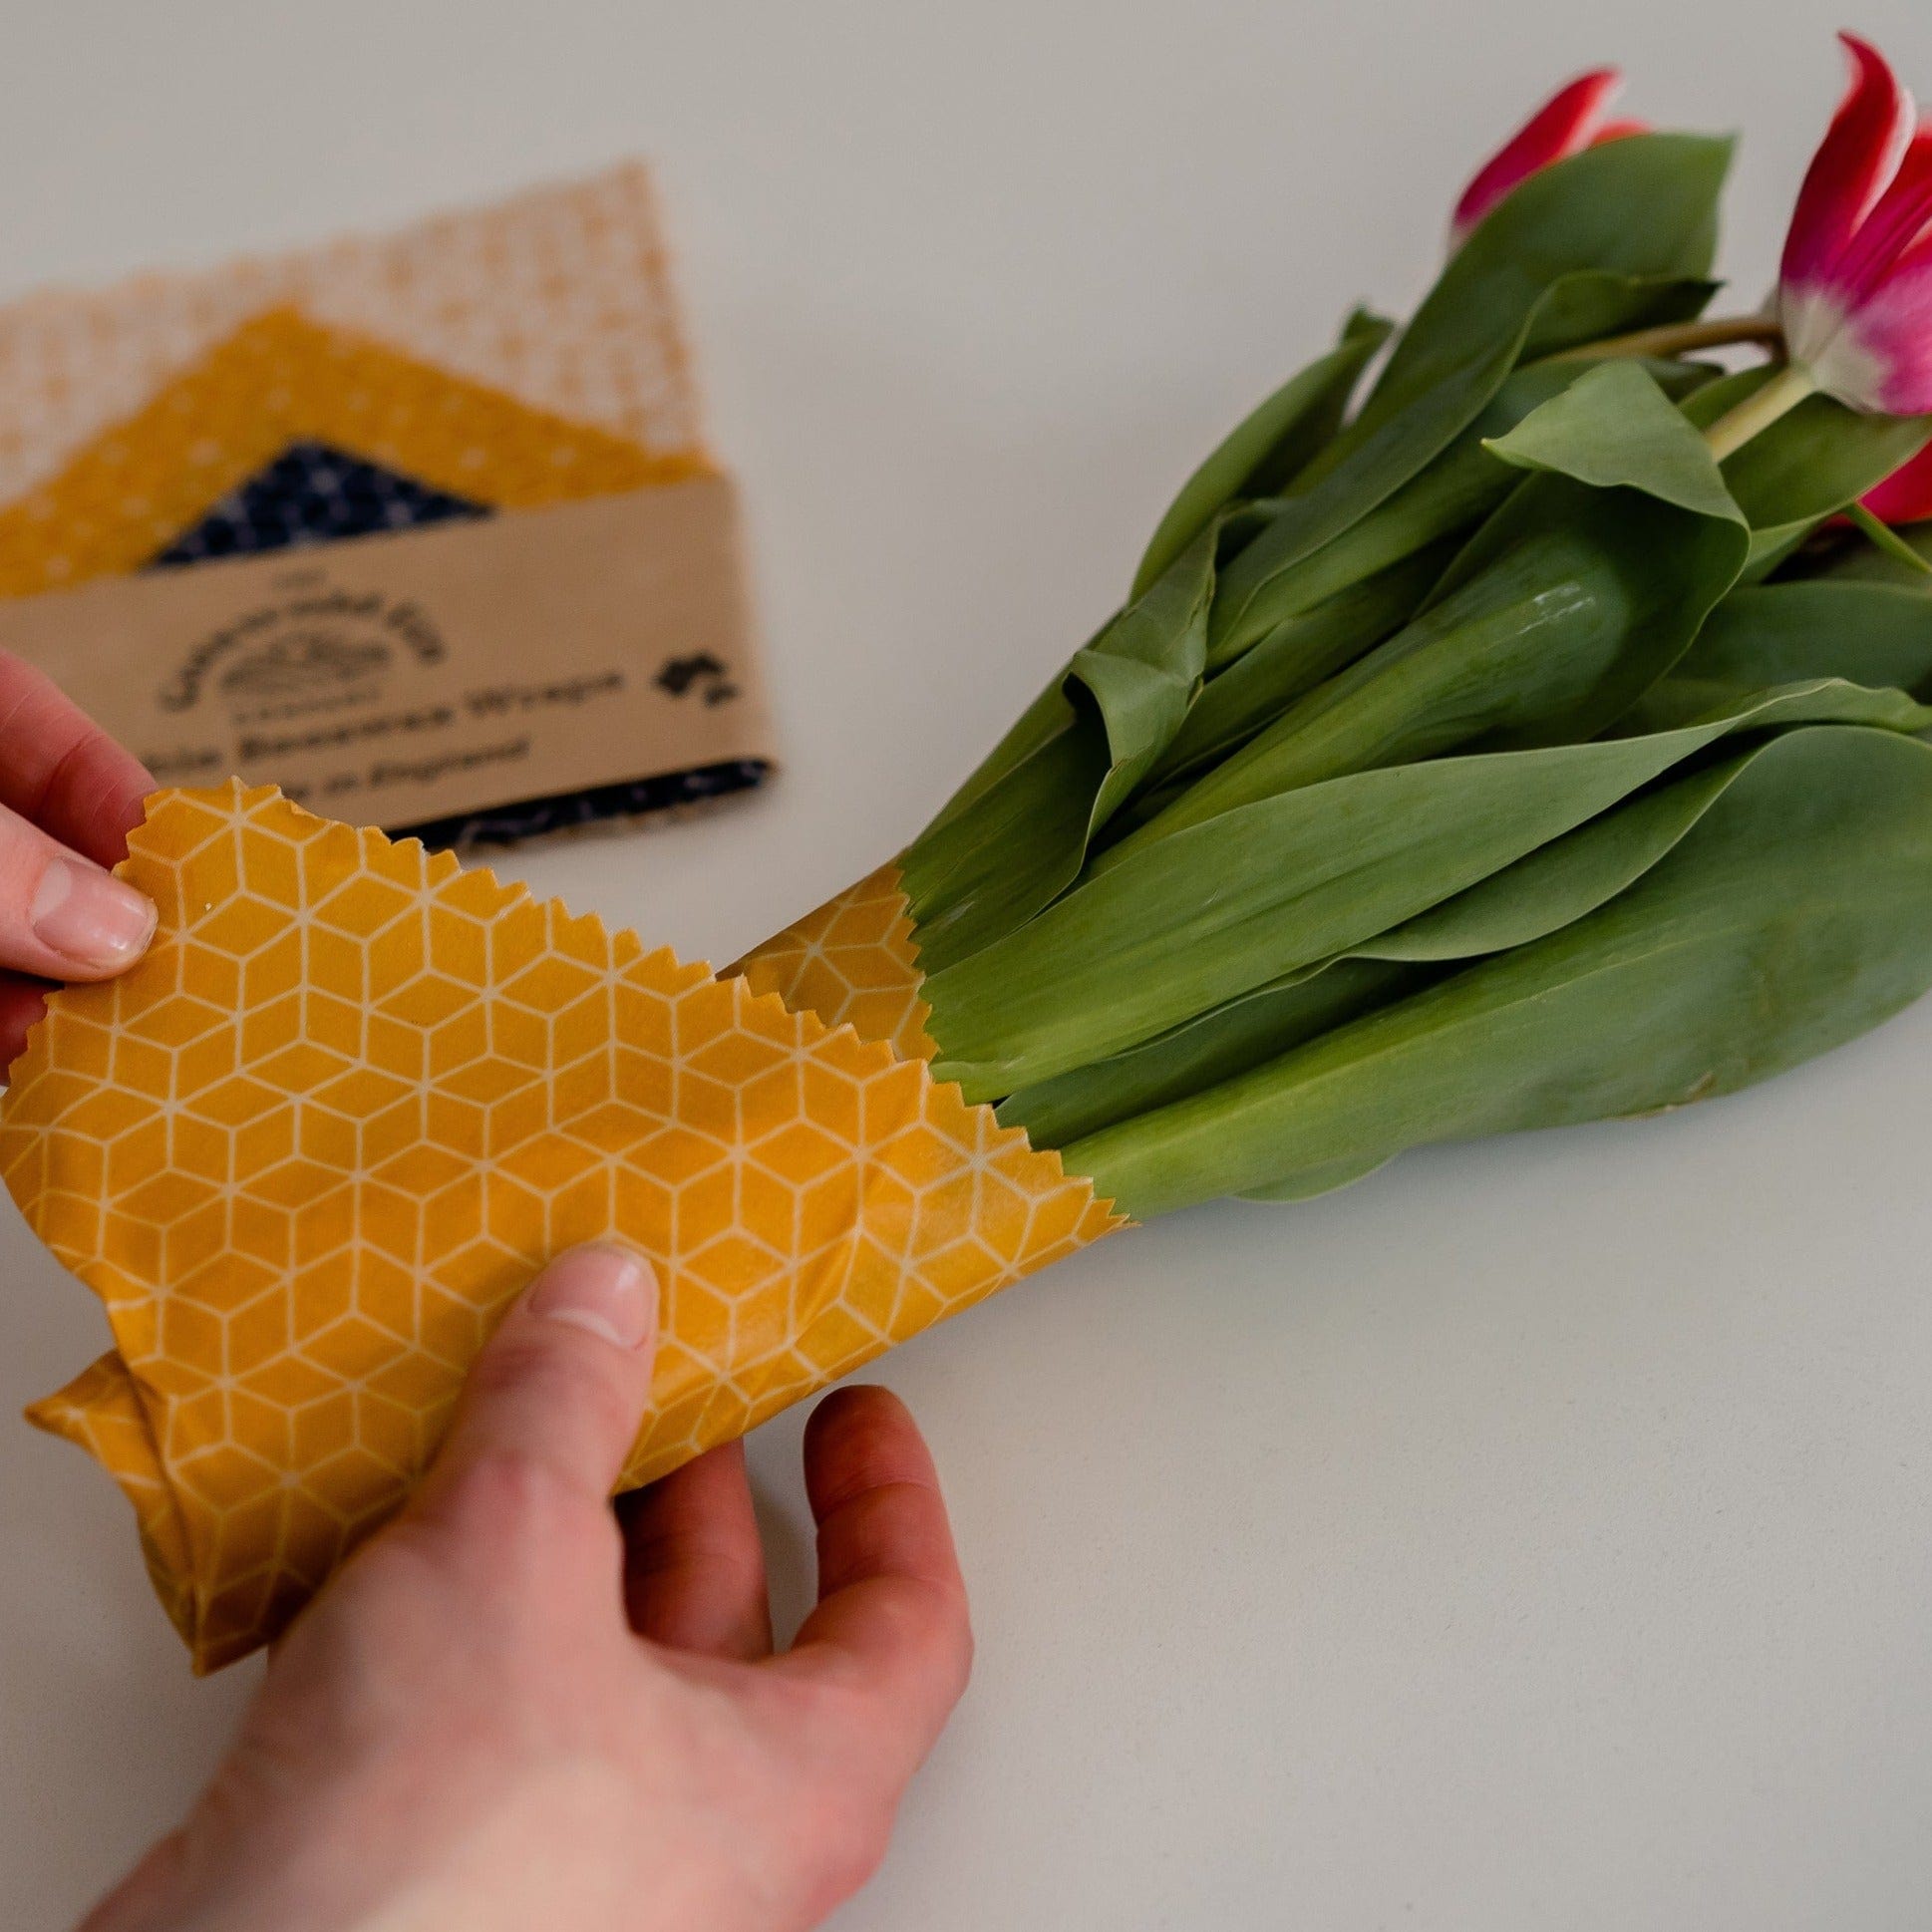 Handmade Beeswax Wraps - wrapping a bunch of pink tulip flowers